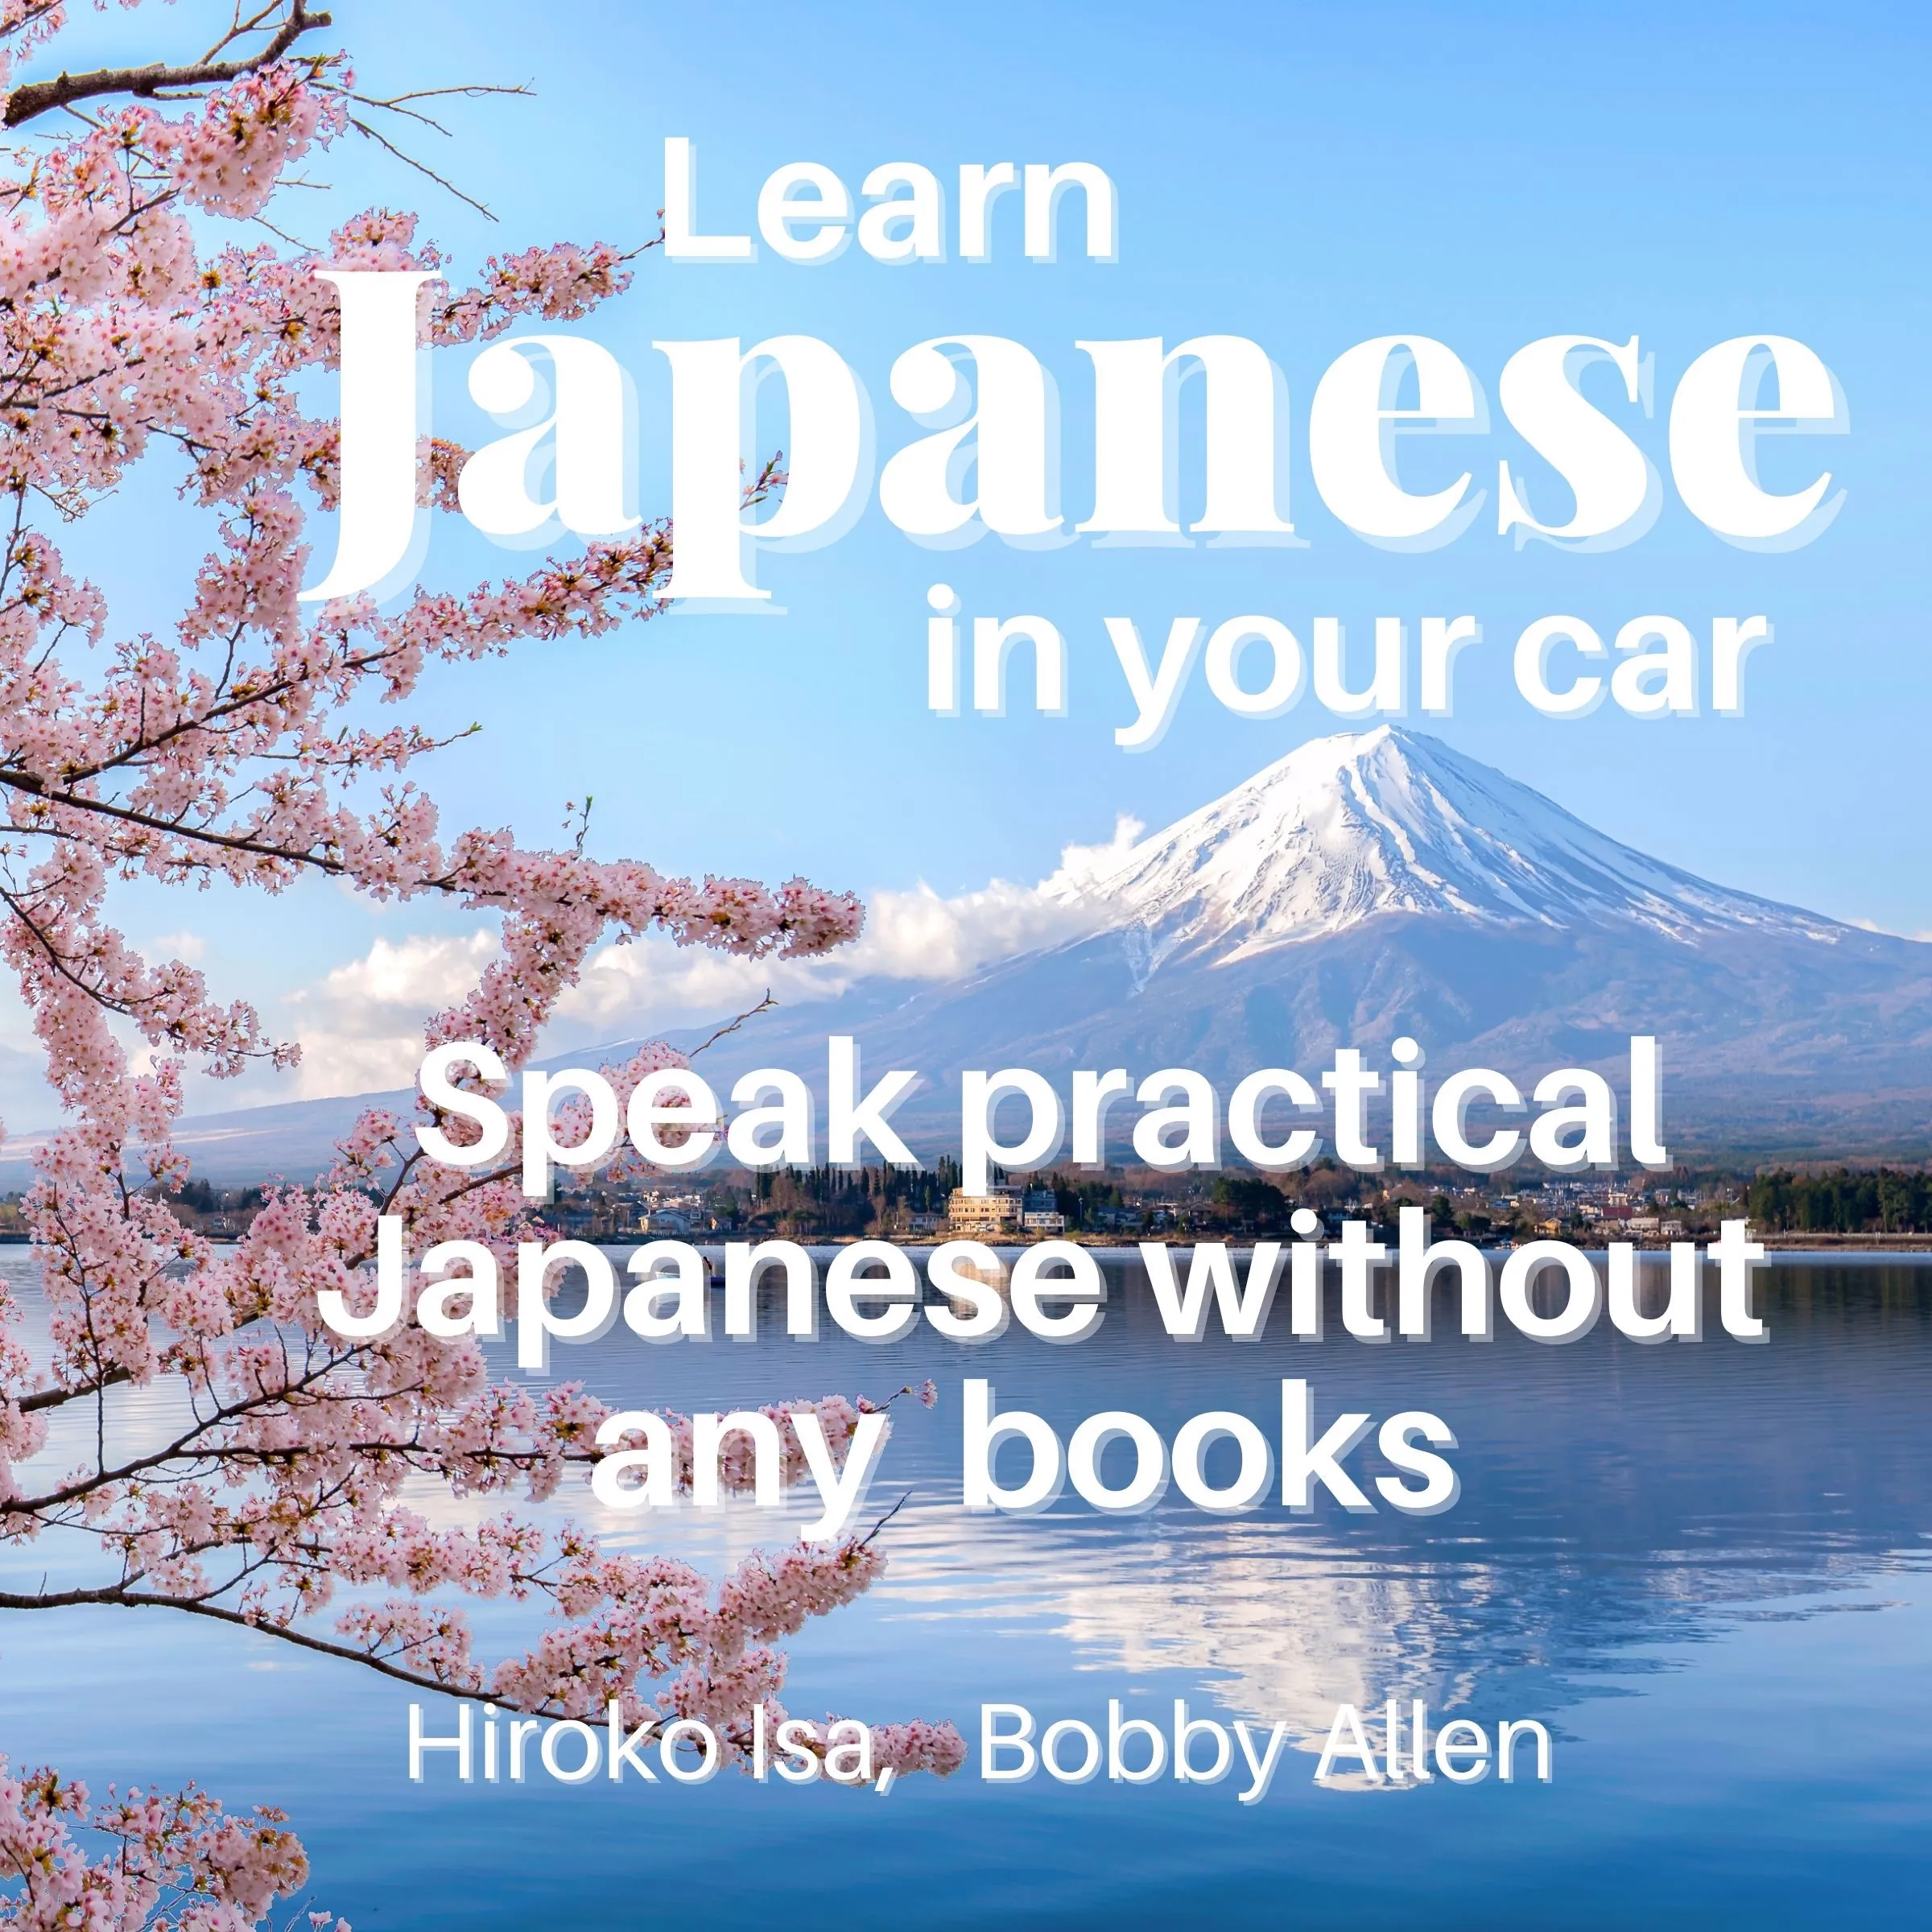 Learn Japanese in your car Audiobook by Hiroko Isa